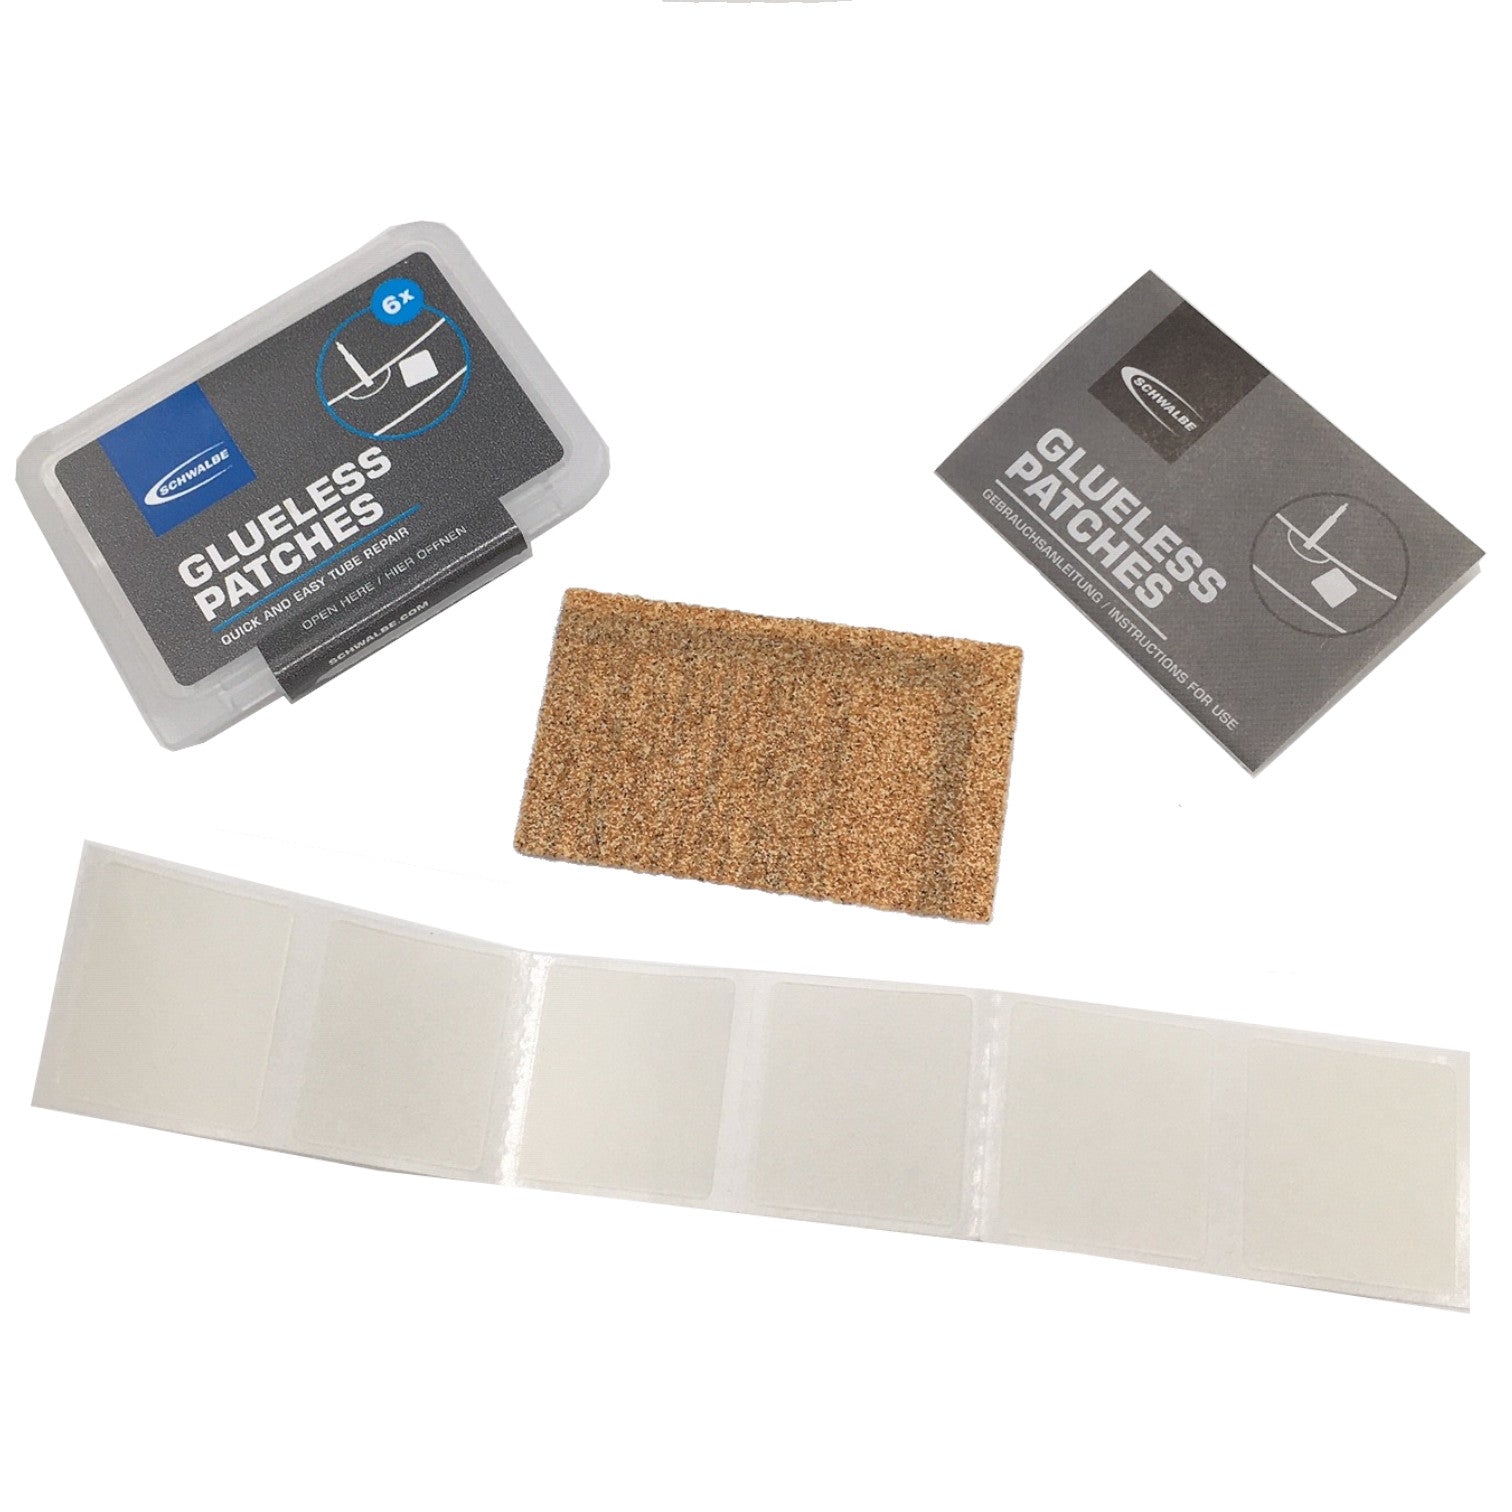 Schwalbe Glueless Patches Pack of 6 Clear - Bicycle Puncture Repair Kit Alternate 2